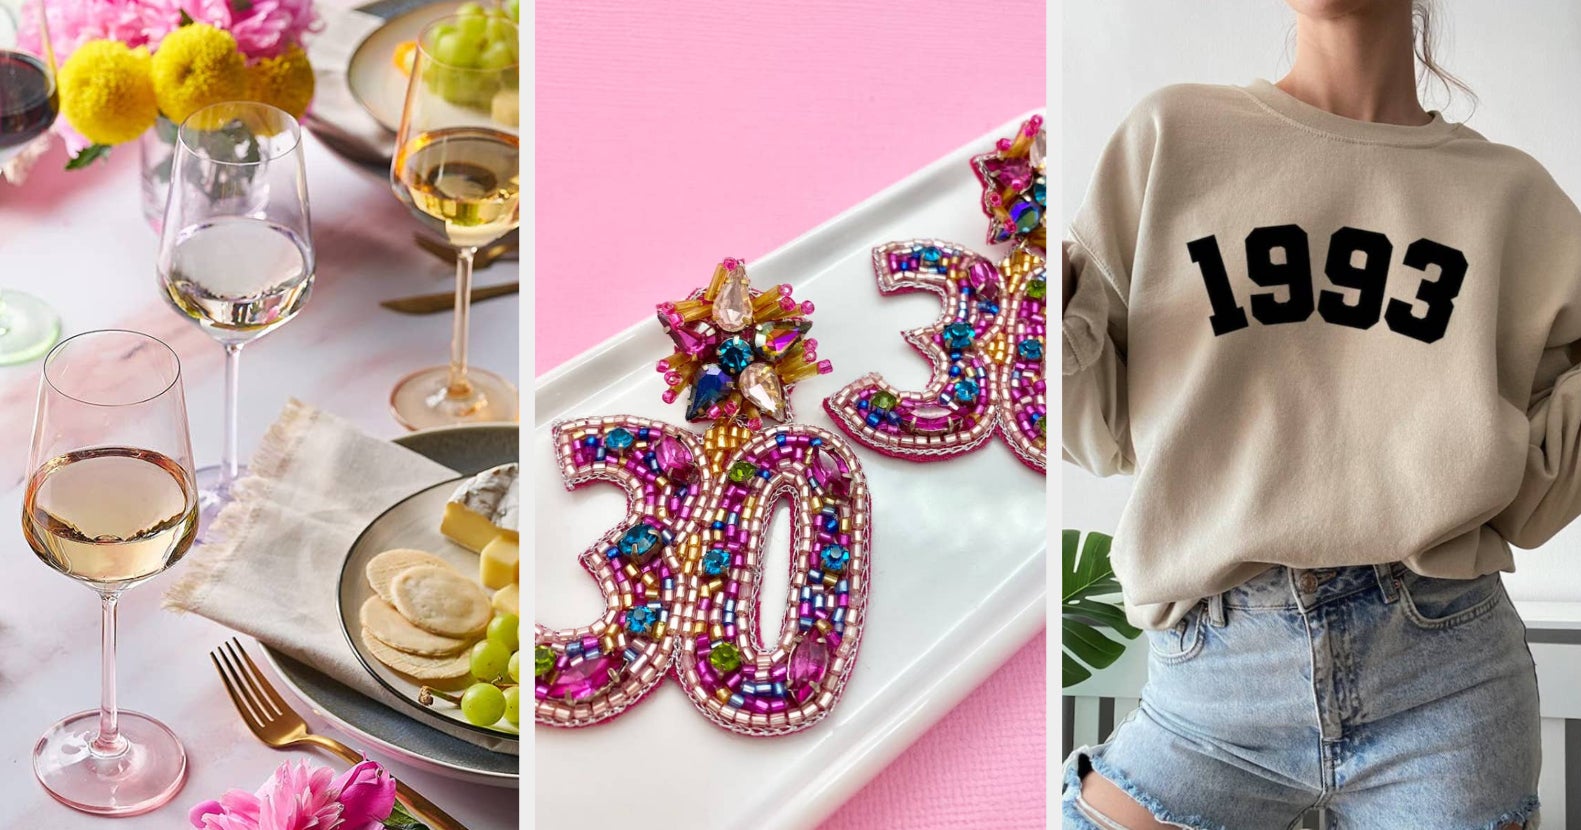 The best 30th birthday gift ideas - Reviewed